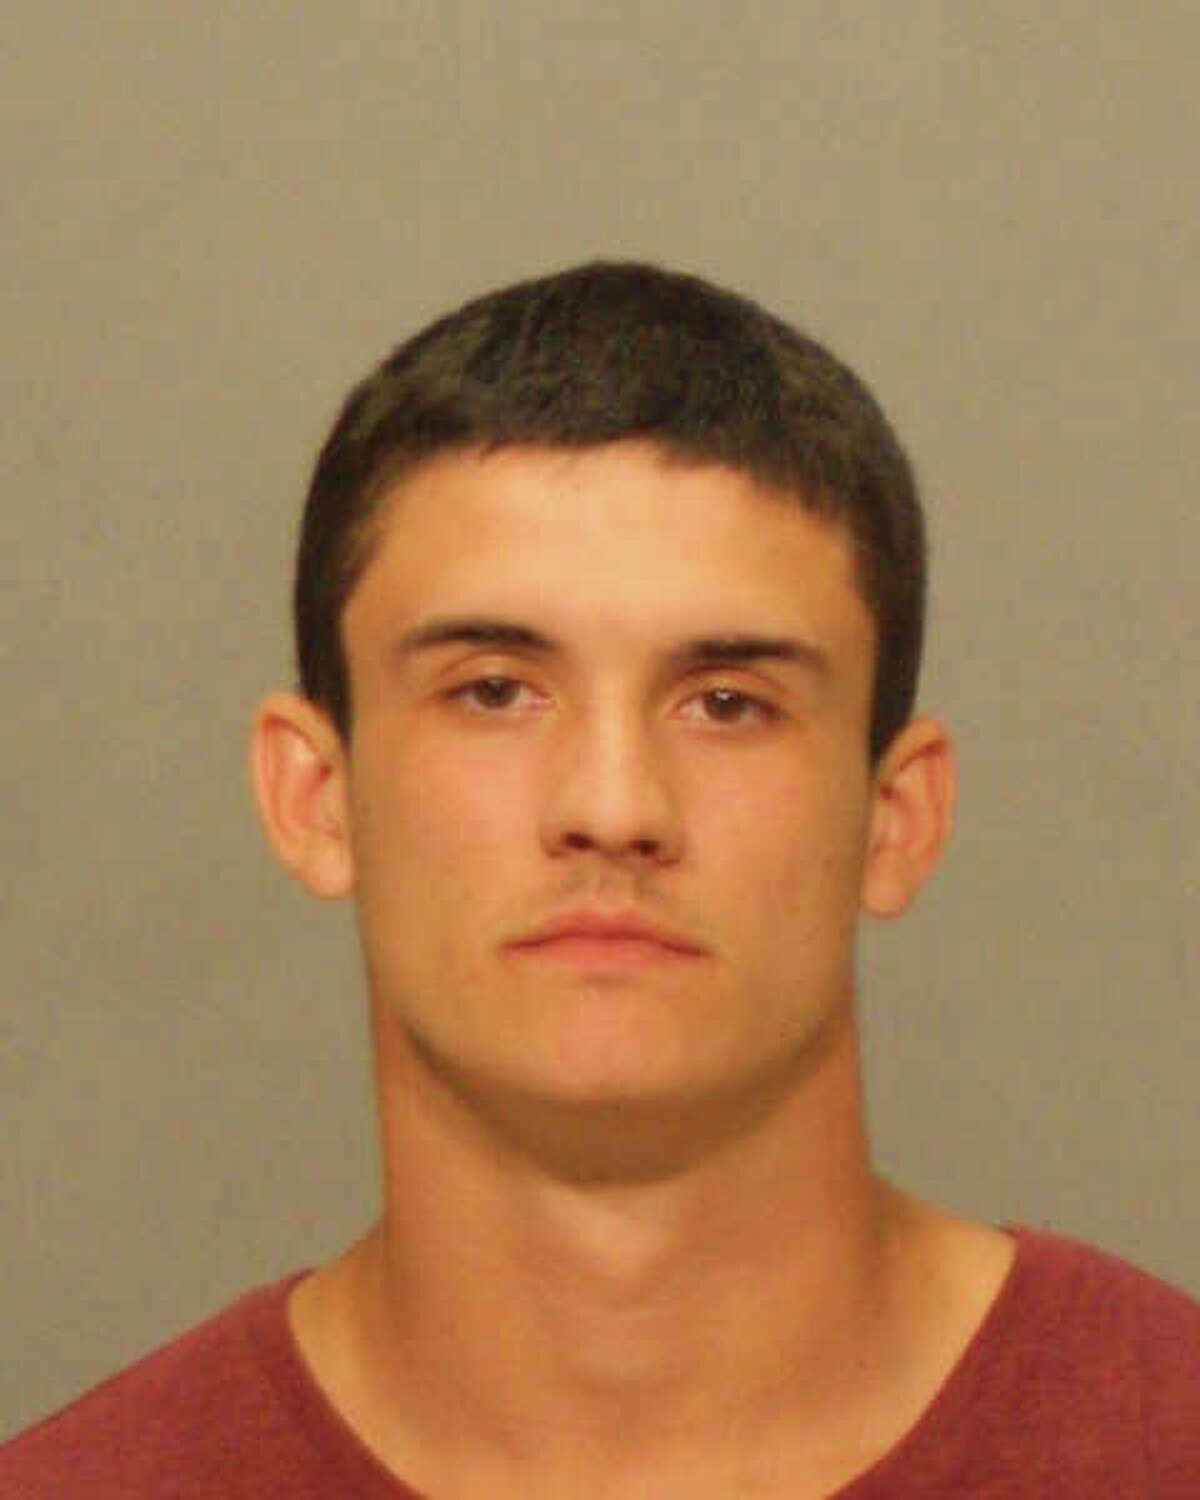 Mark B. Johnson, 19, of Cos Cob, has been charged with burglarizing a Shelter Drive home and attempting to flee from responding police Sunday, Sept. 16, 2012.